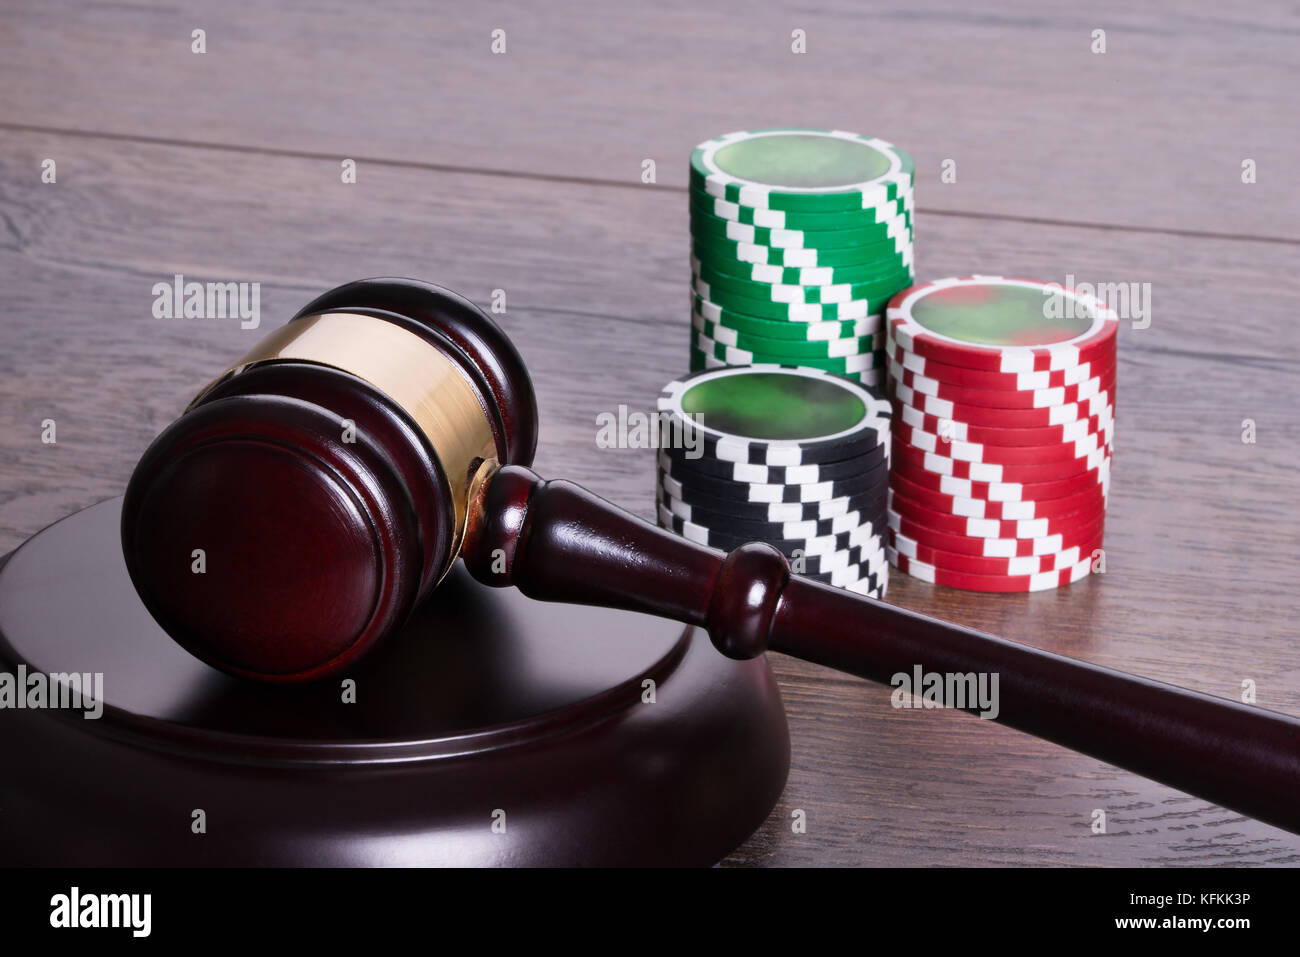 Casino chips and gavel in gambling legal concept Stock Photo